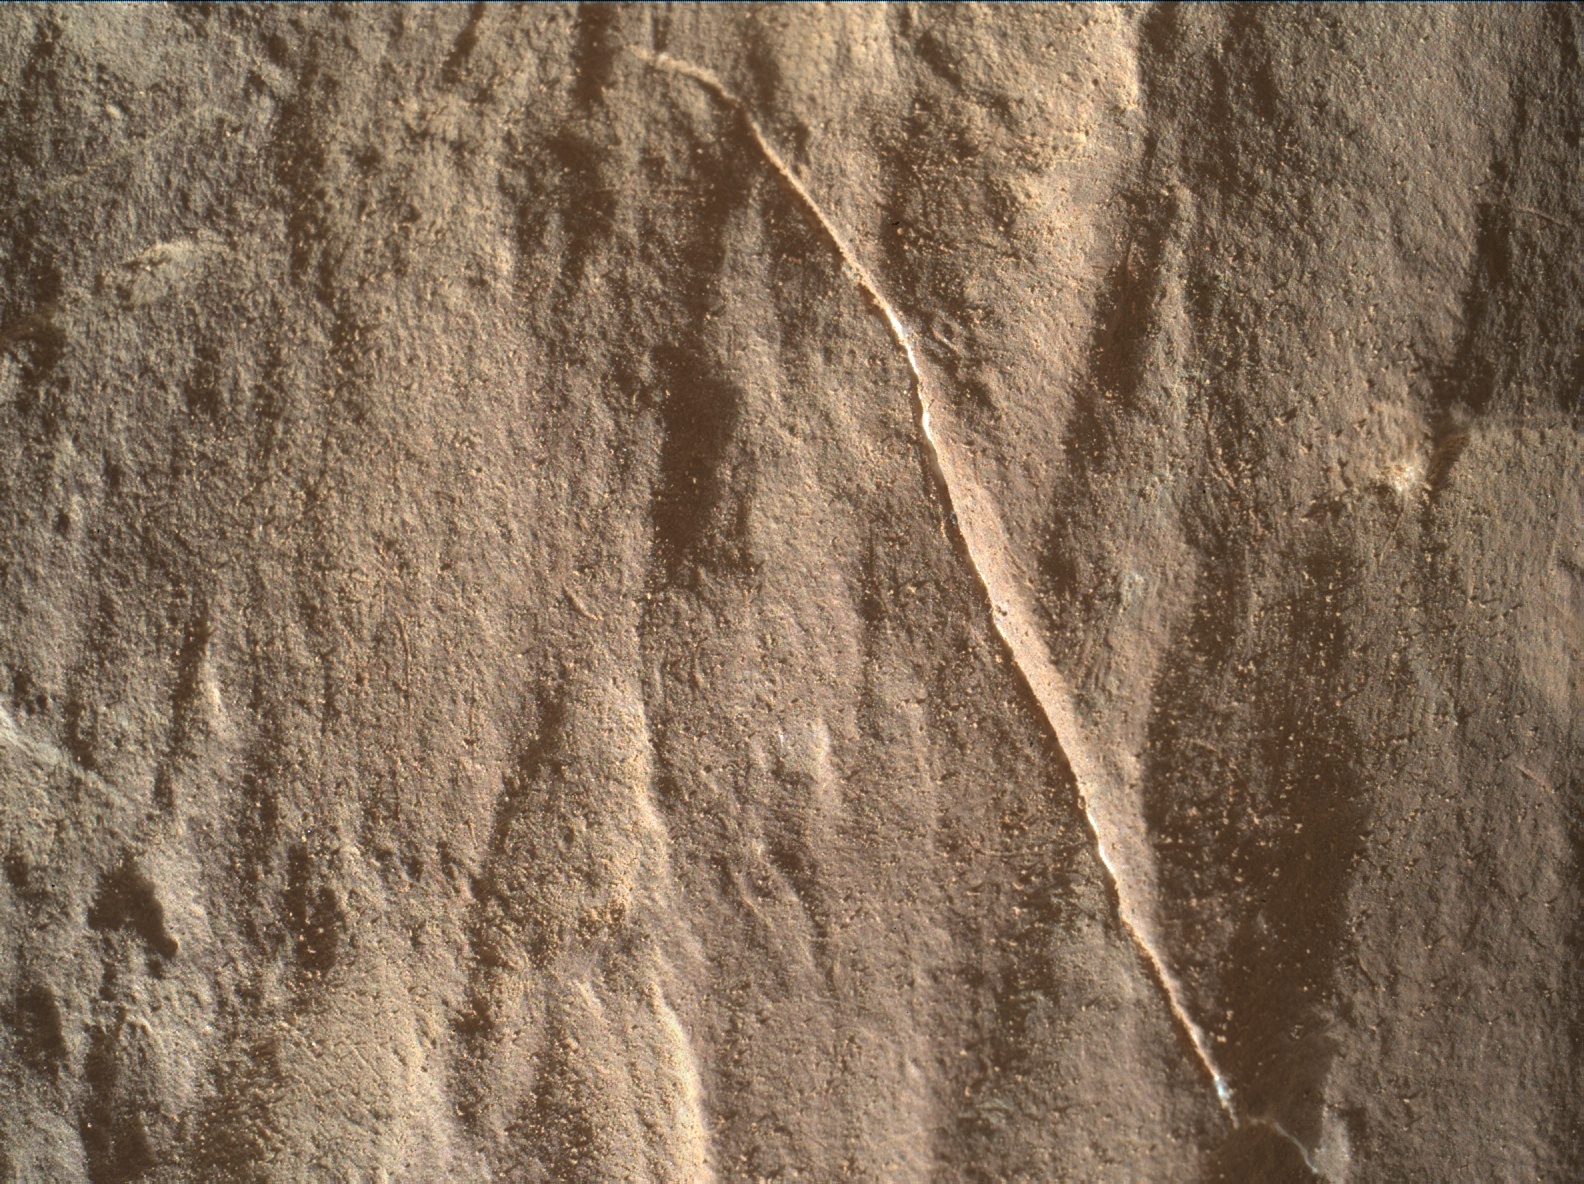 Nasa's Mars rover Curiosity acquired this image using its Mars Hand Lens Imager (MAHLI) on Sol 1836